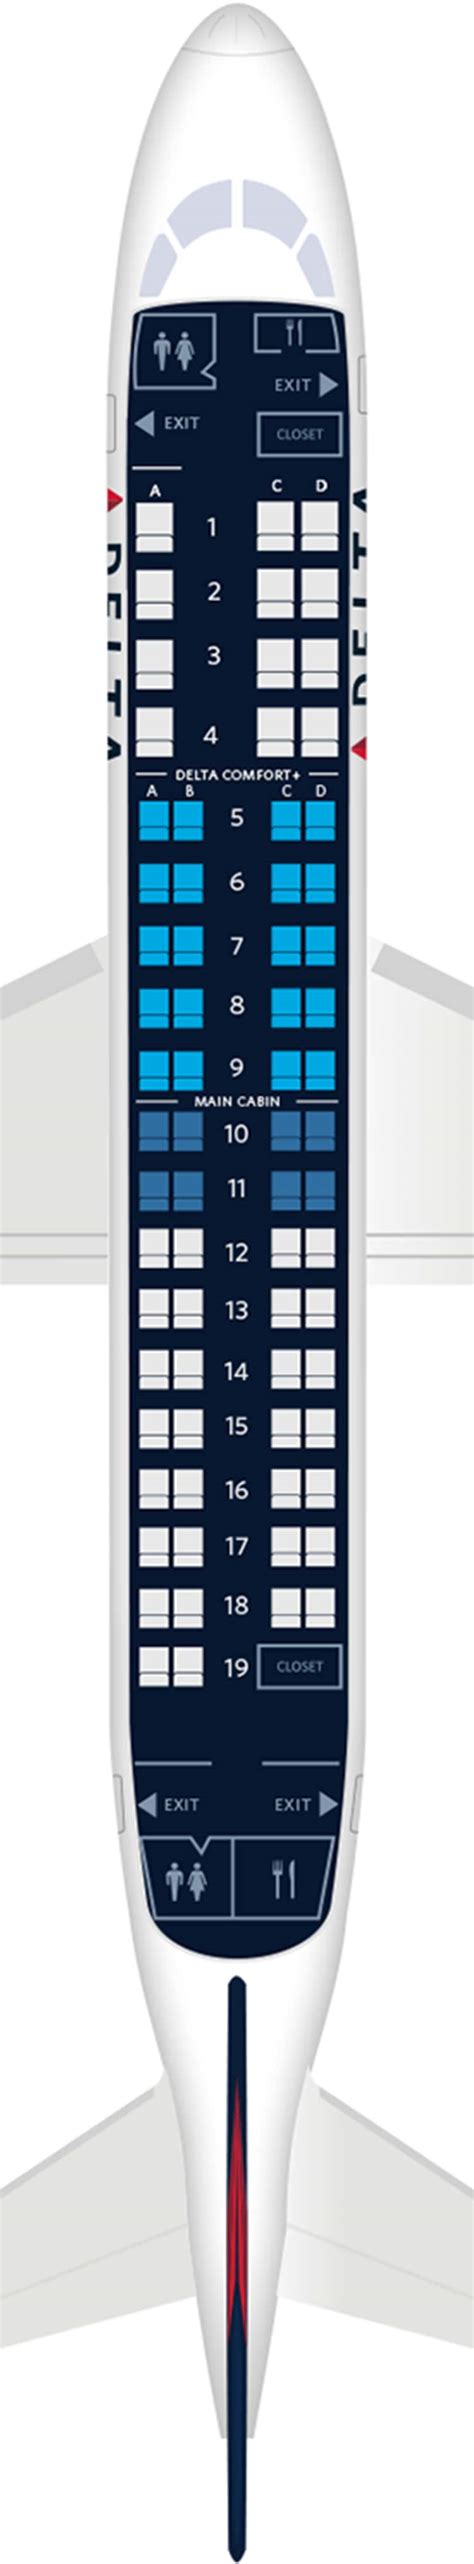 Embraer erj 175 seat map - For your next American Airlines flight, use this seating chart to get the most comfortable seats, legroom, and recline on .